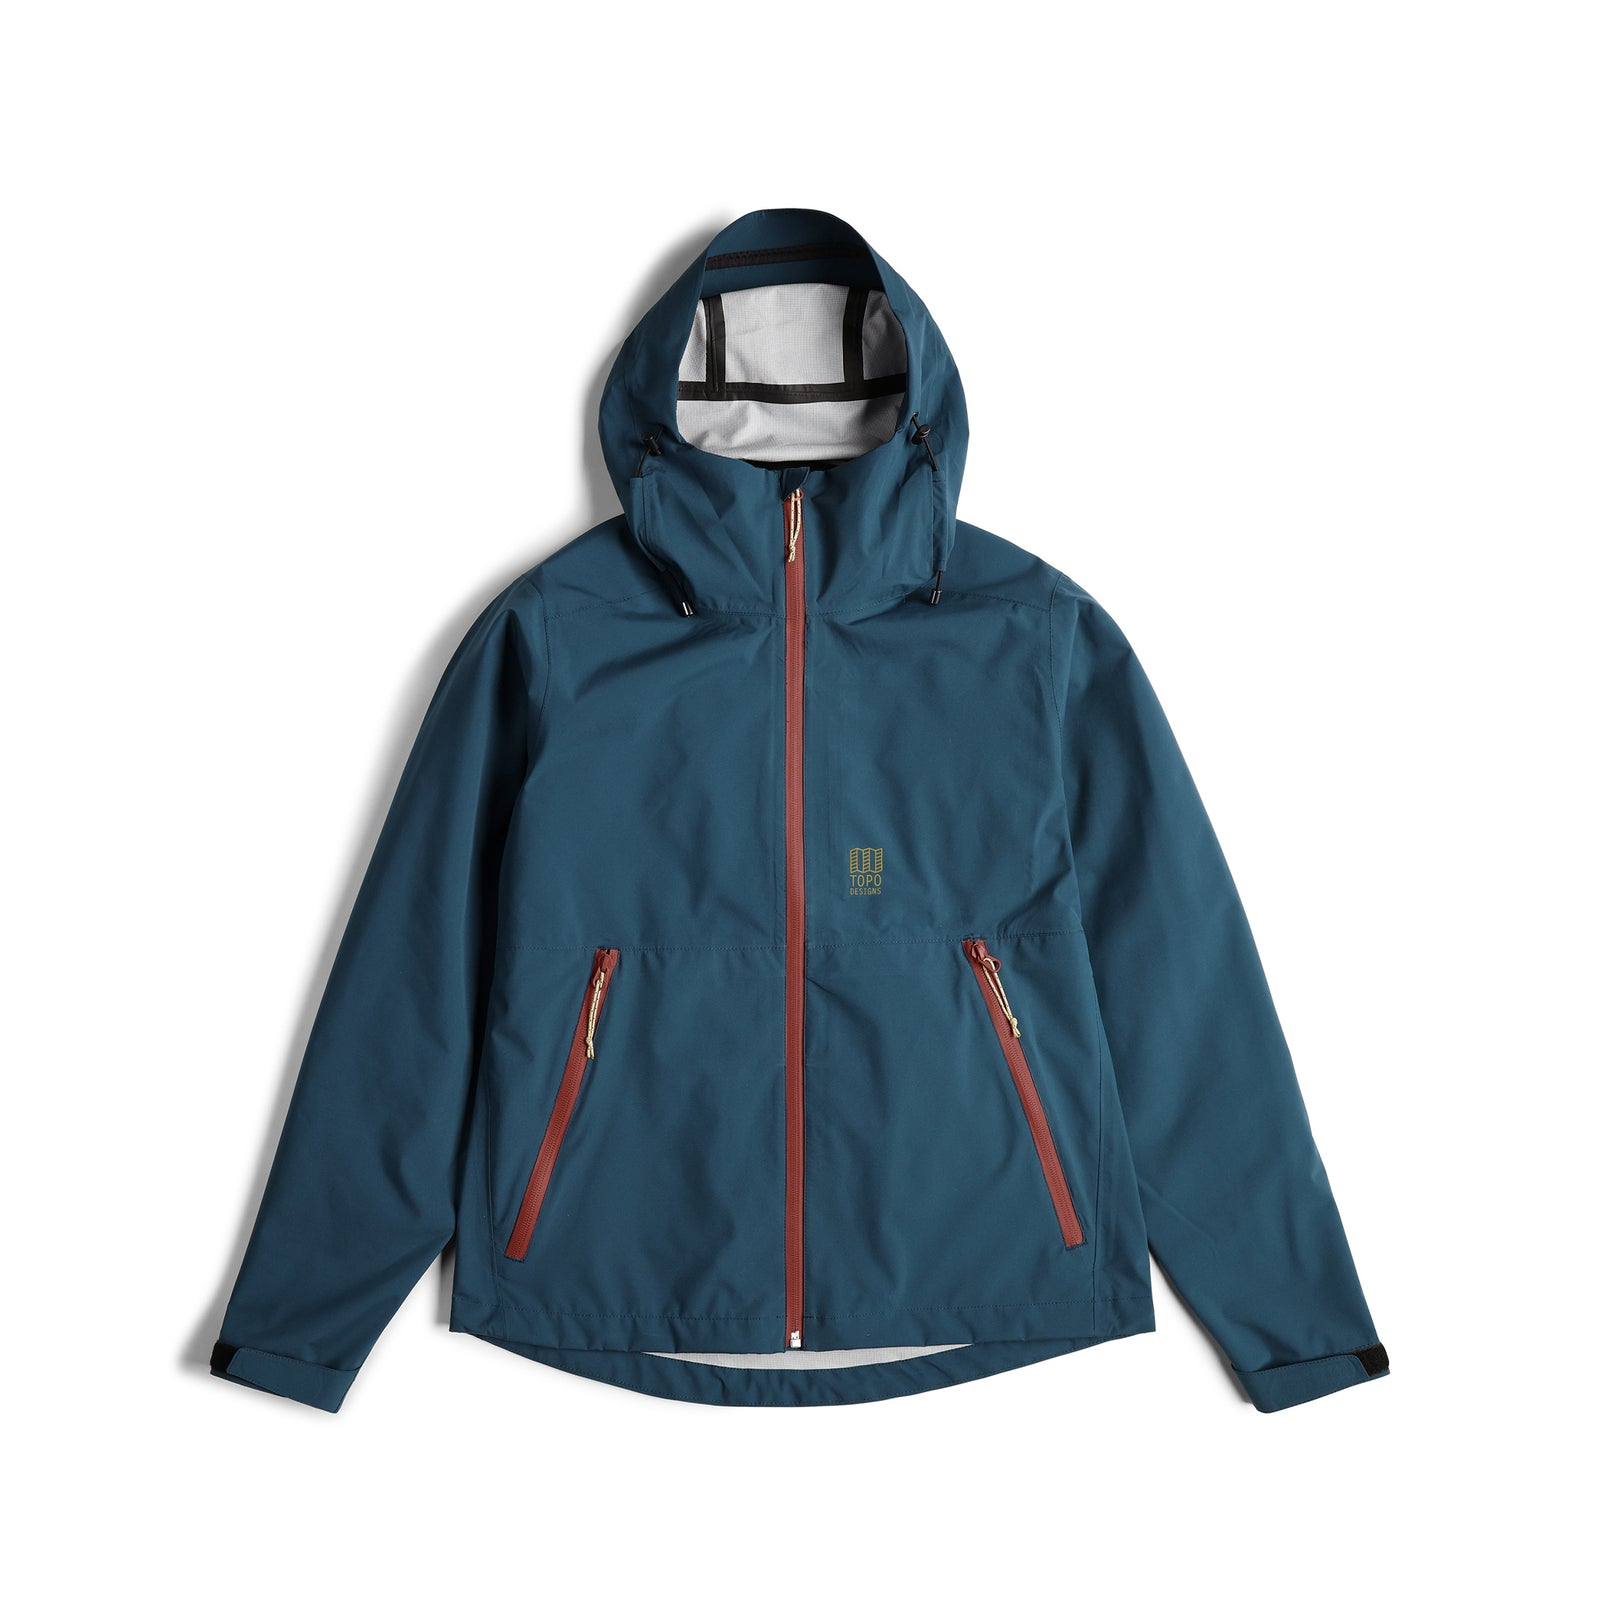 Topo Designs Men's Global Jacket packable 10k waterproof rain shell in recycled "Pond Blue" polyester.